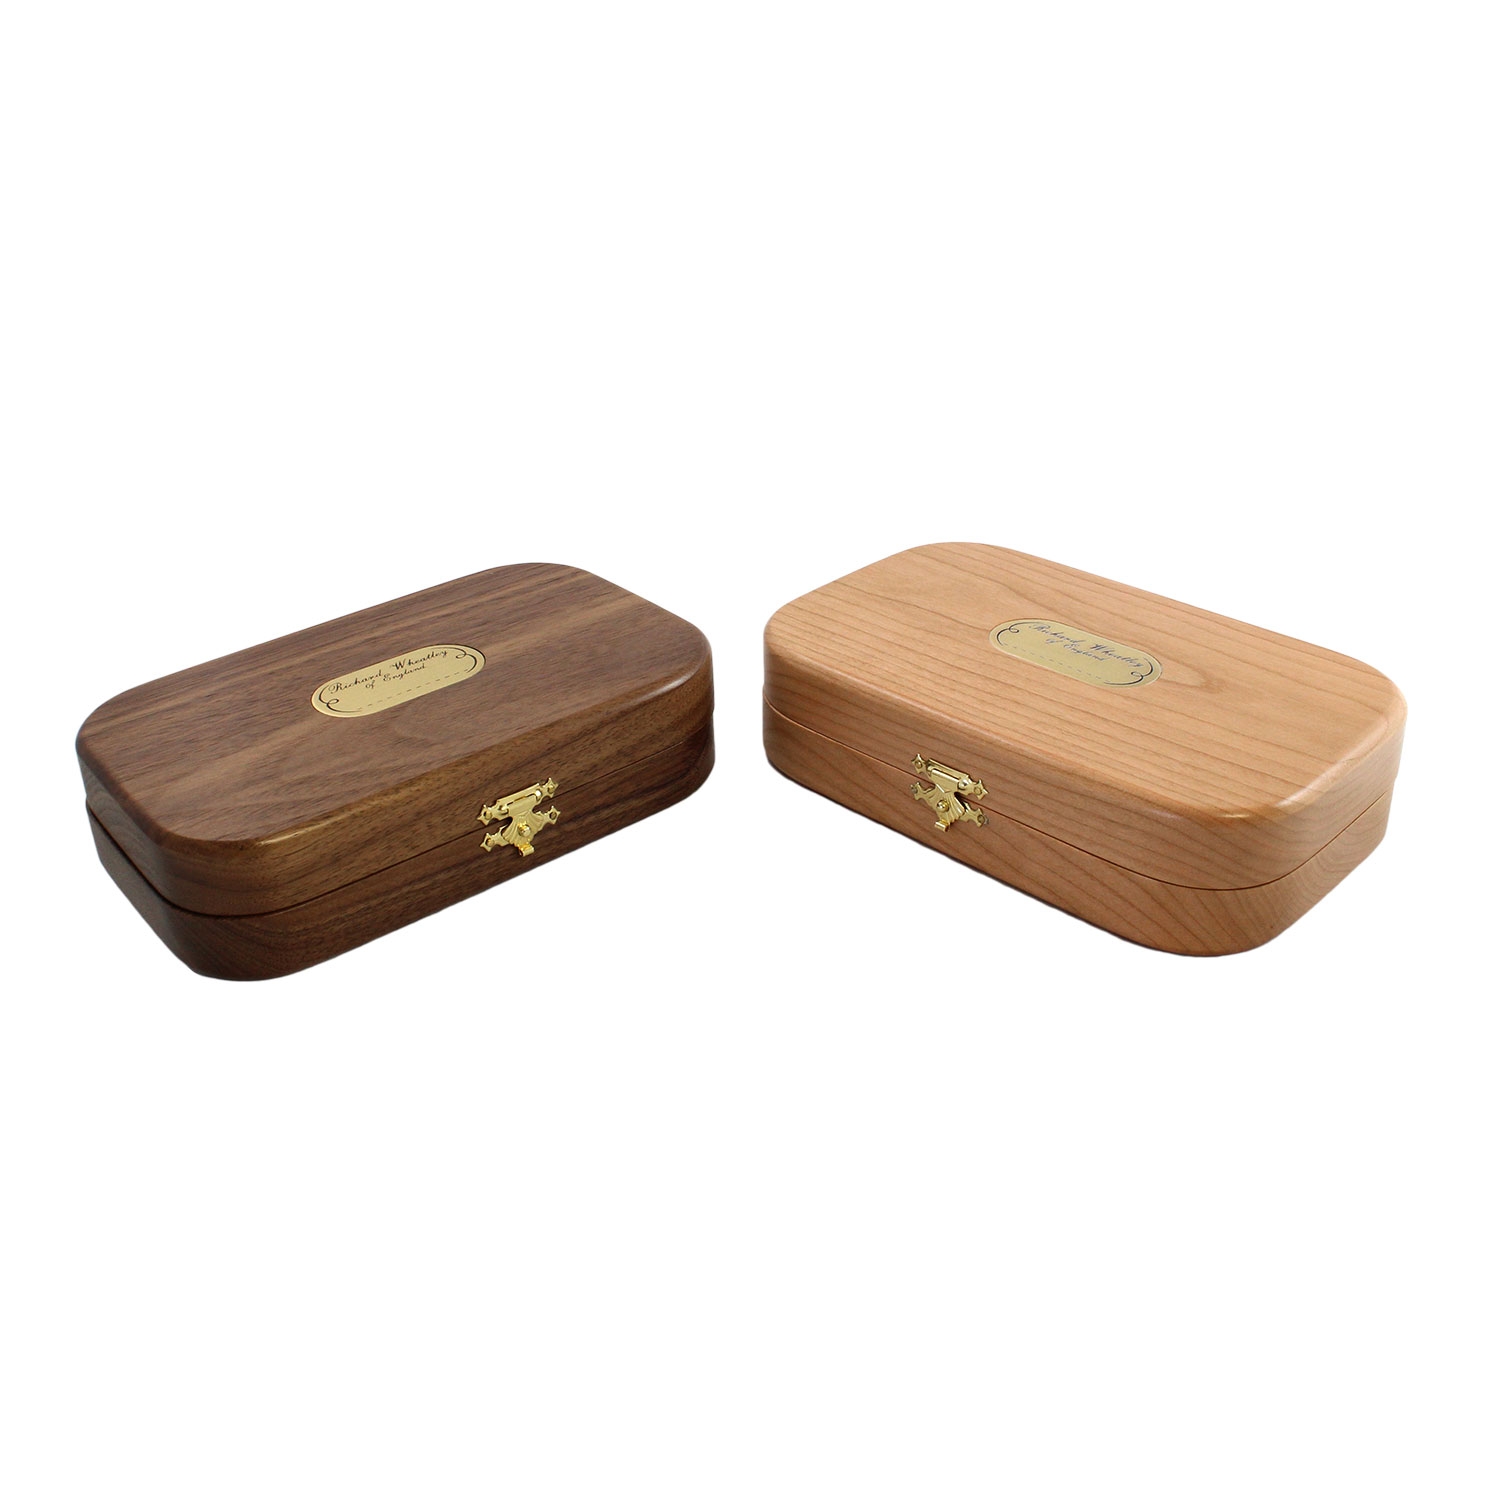 https://cdn.anglingactive.co.uk/media/catalog/product/cache/c7a5695839b539f20c8015776a05748c/r/i/richard_wheatley_deluxe_wooden_fly_boxes_-_flies_storage_fishing_cases.jpg